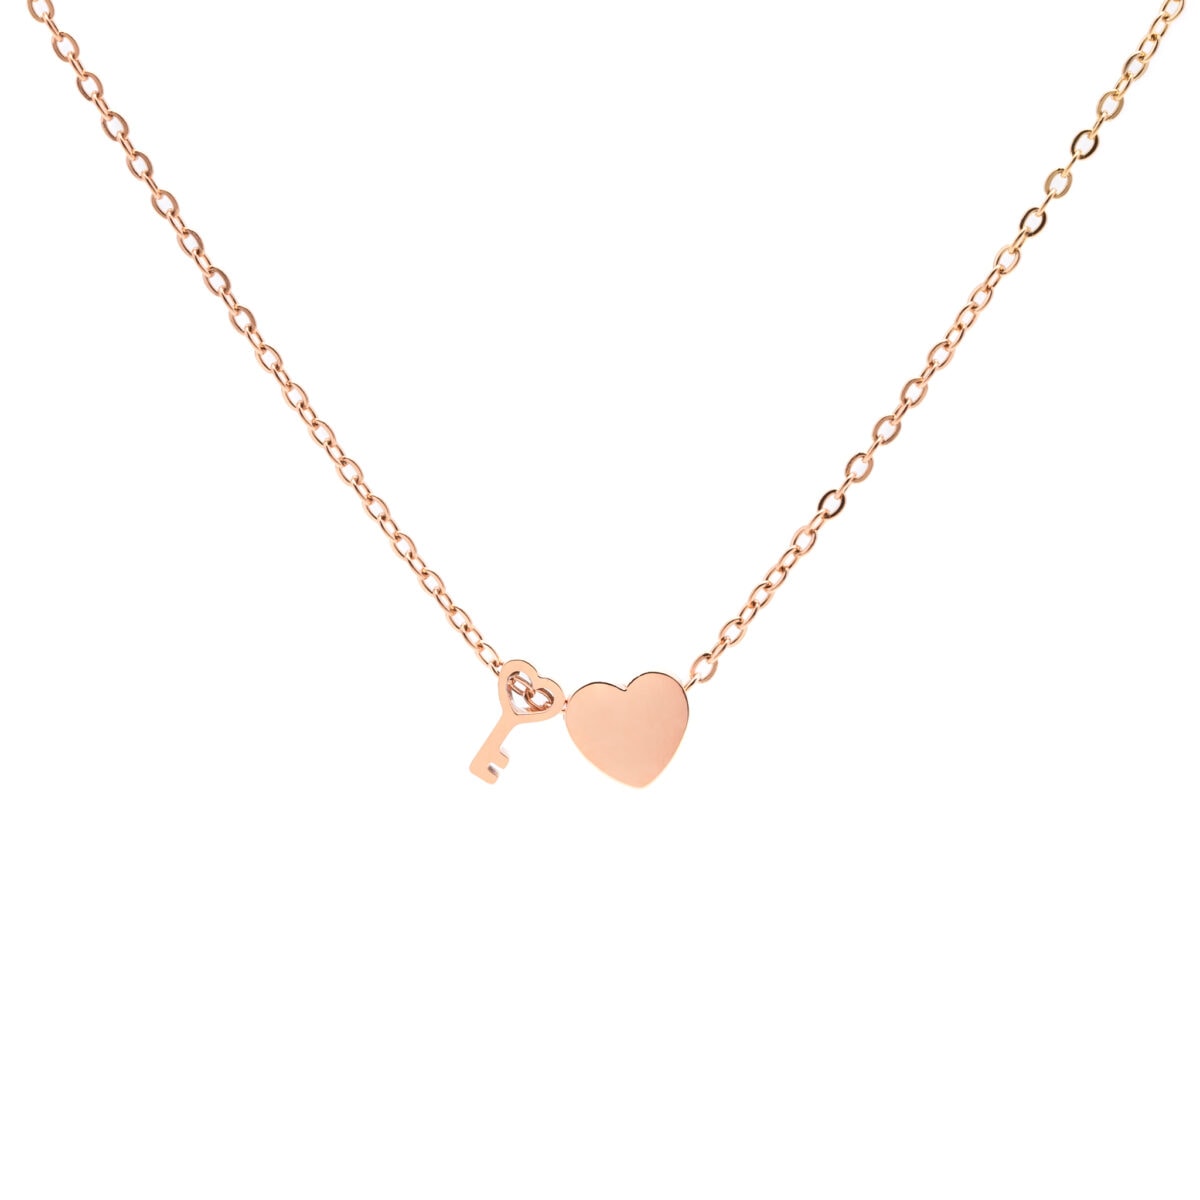 https://m.clubbella.co/product/key-to-thee-heart-rose-gold-charm-necklace/ Key to Thee Rose Gold (2)